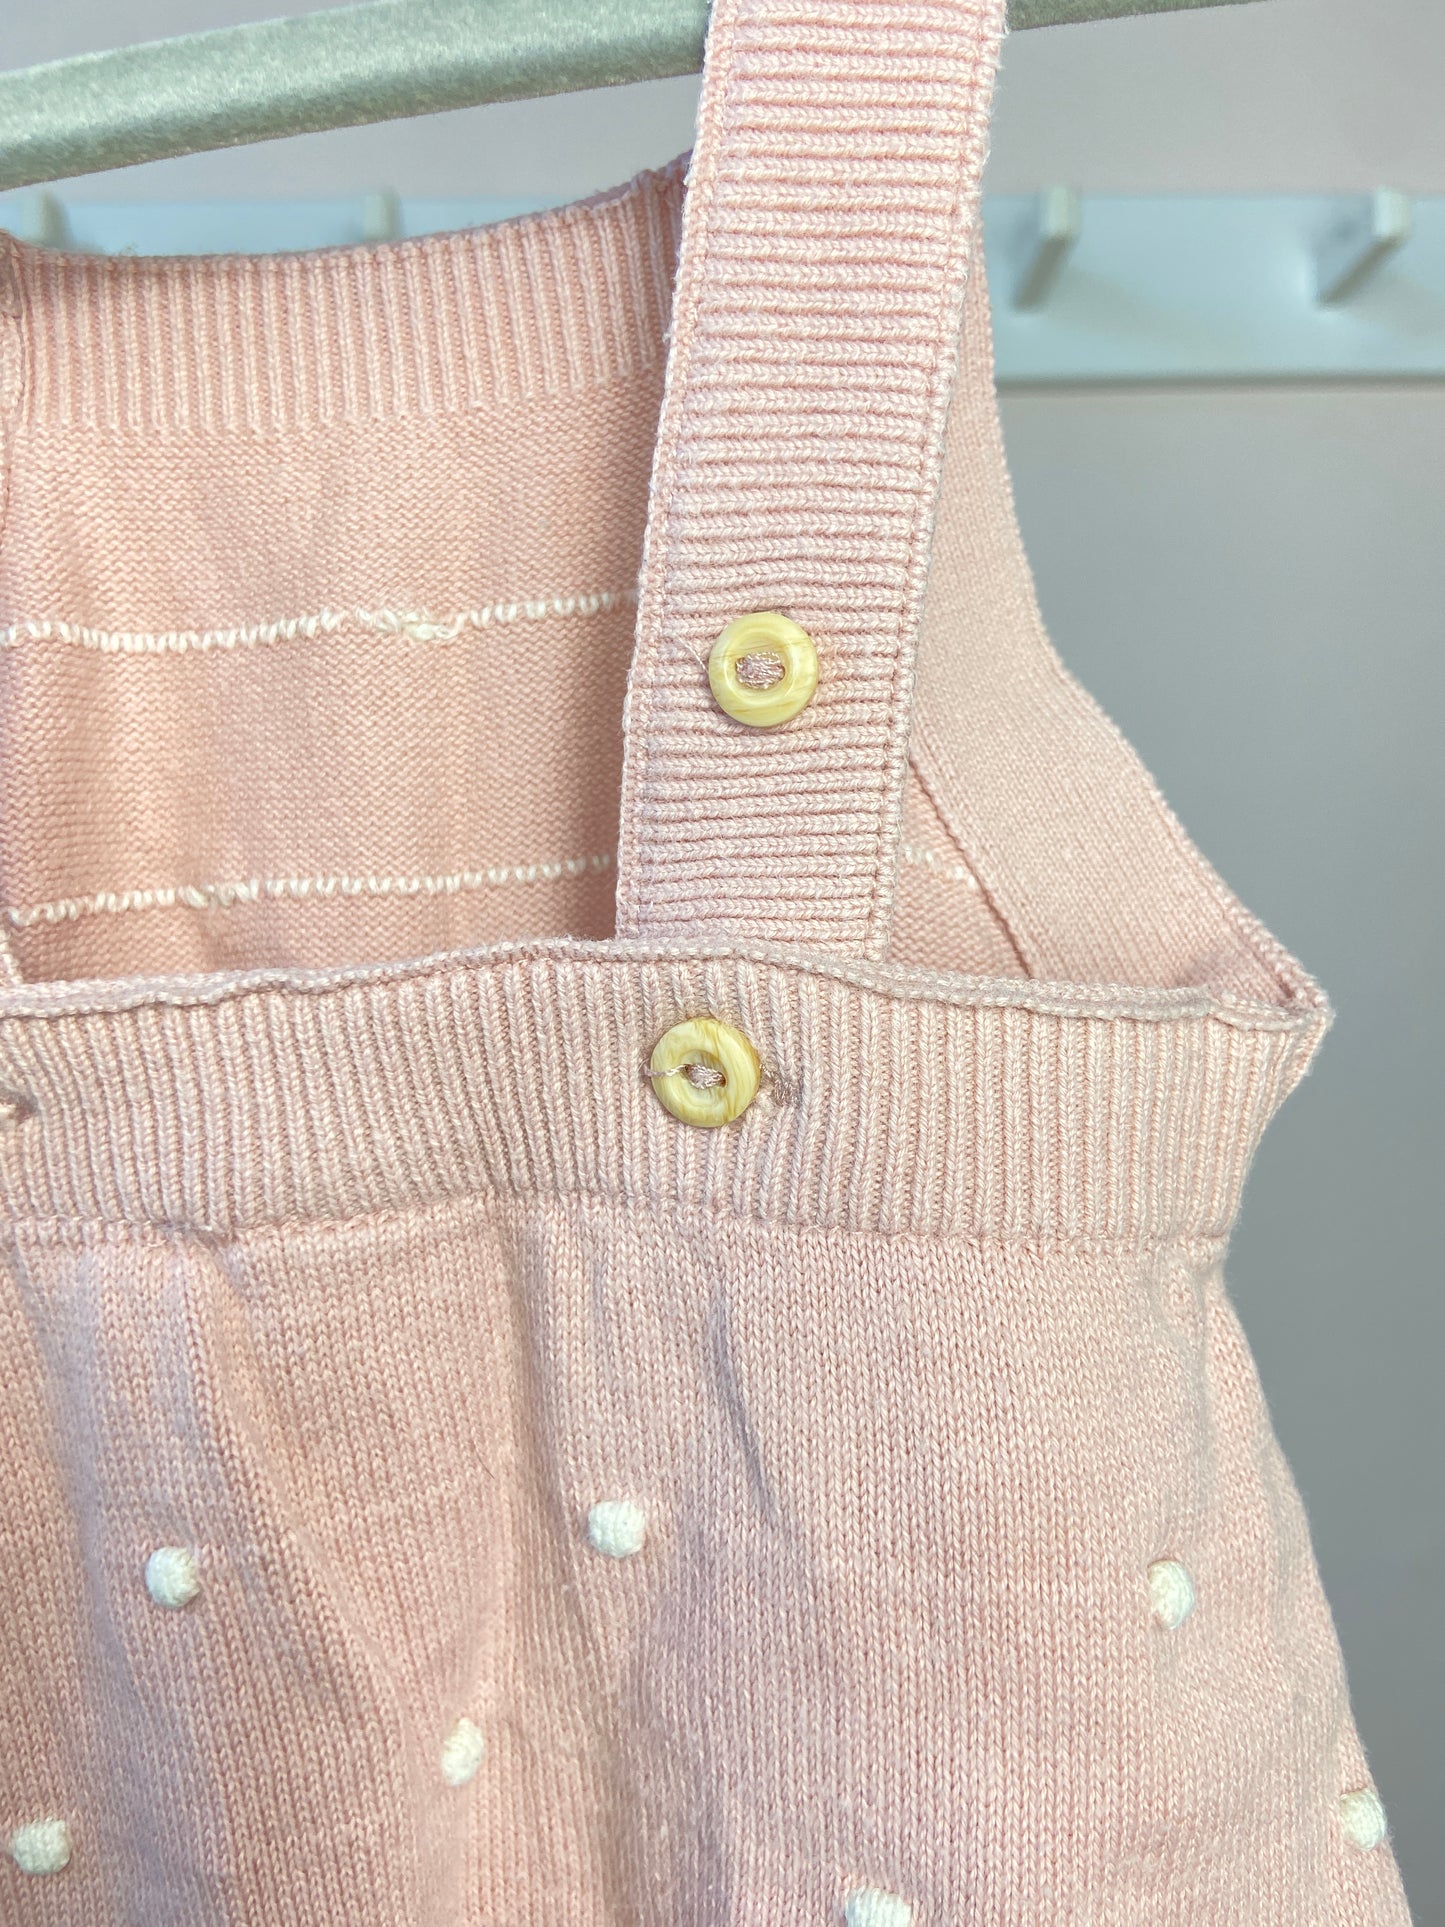 1-2 M Peach knitted dungarees